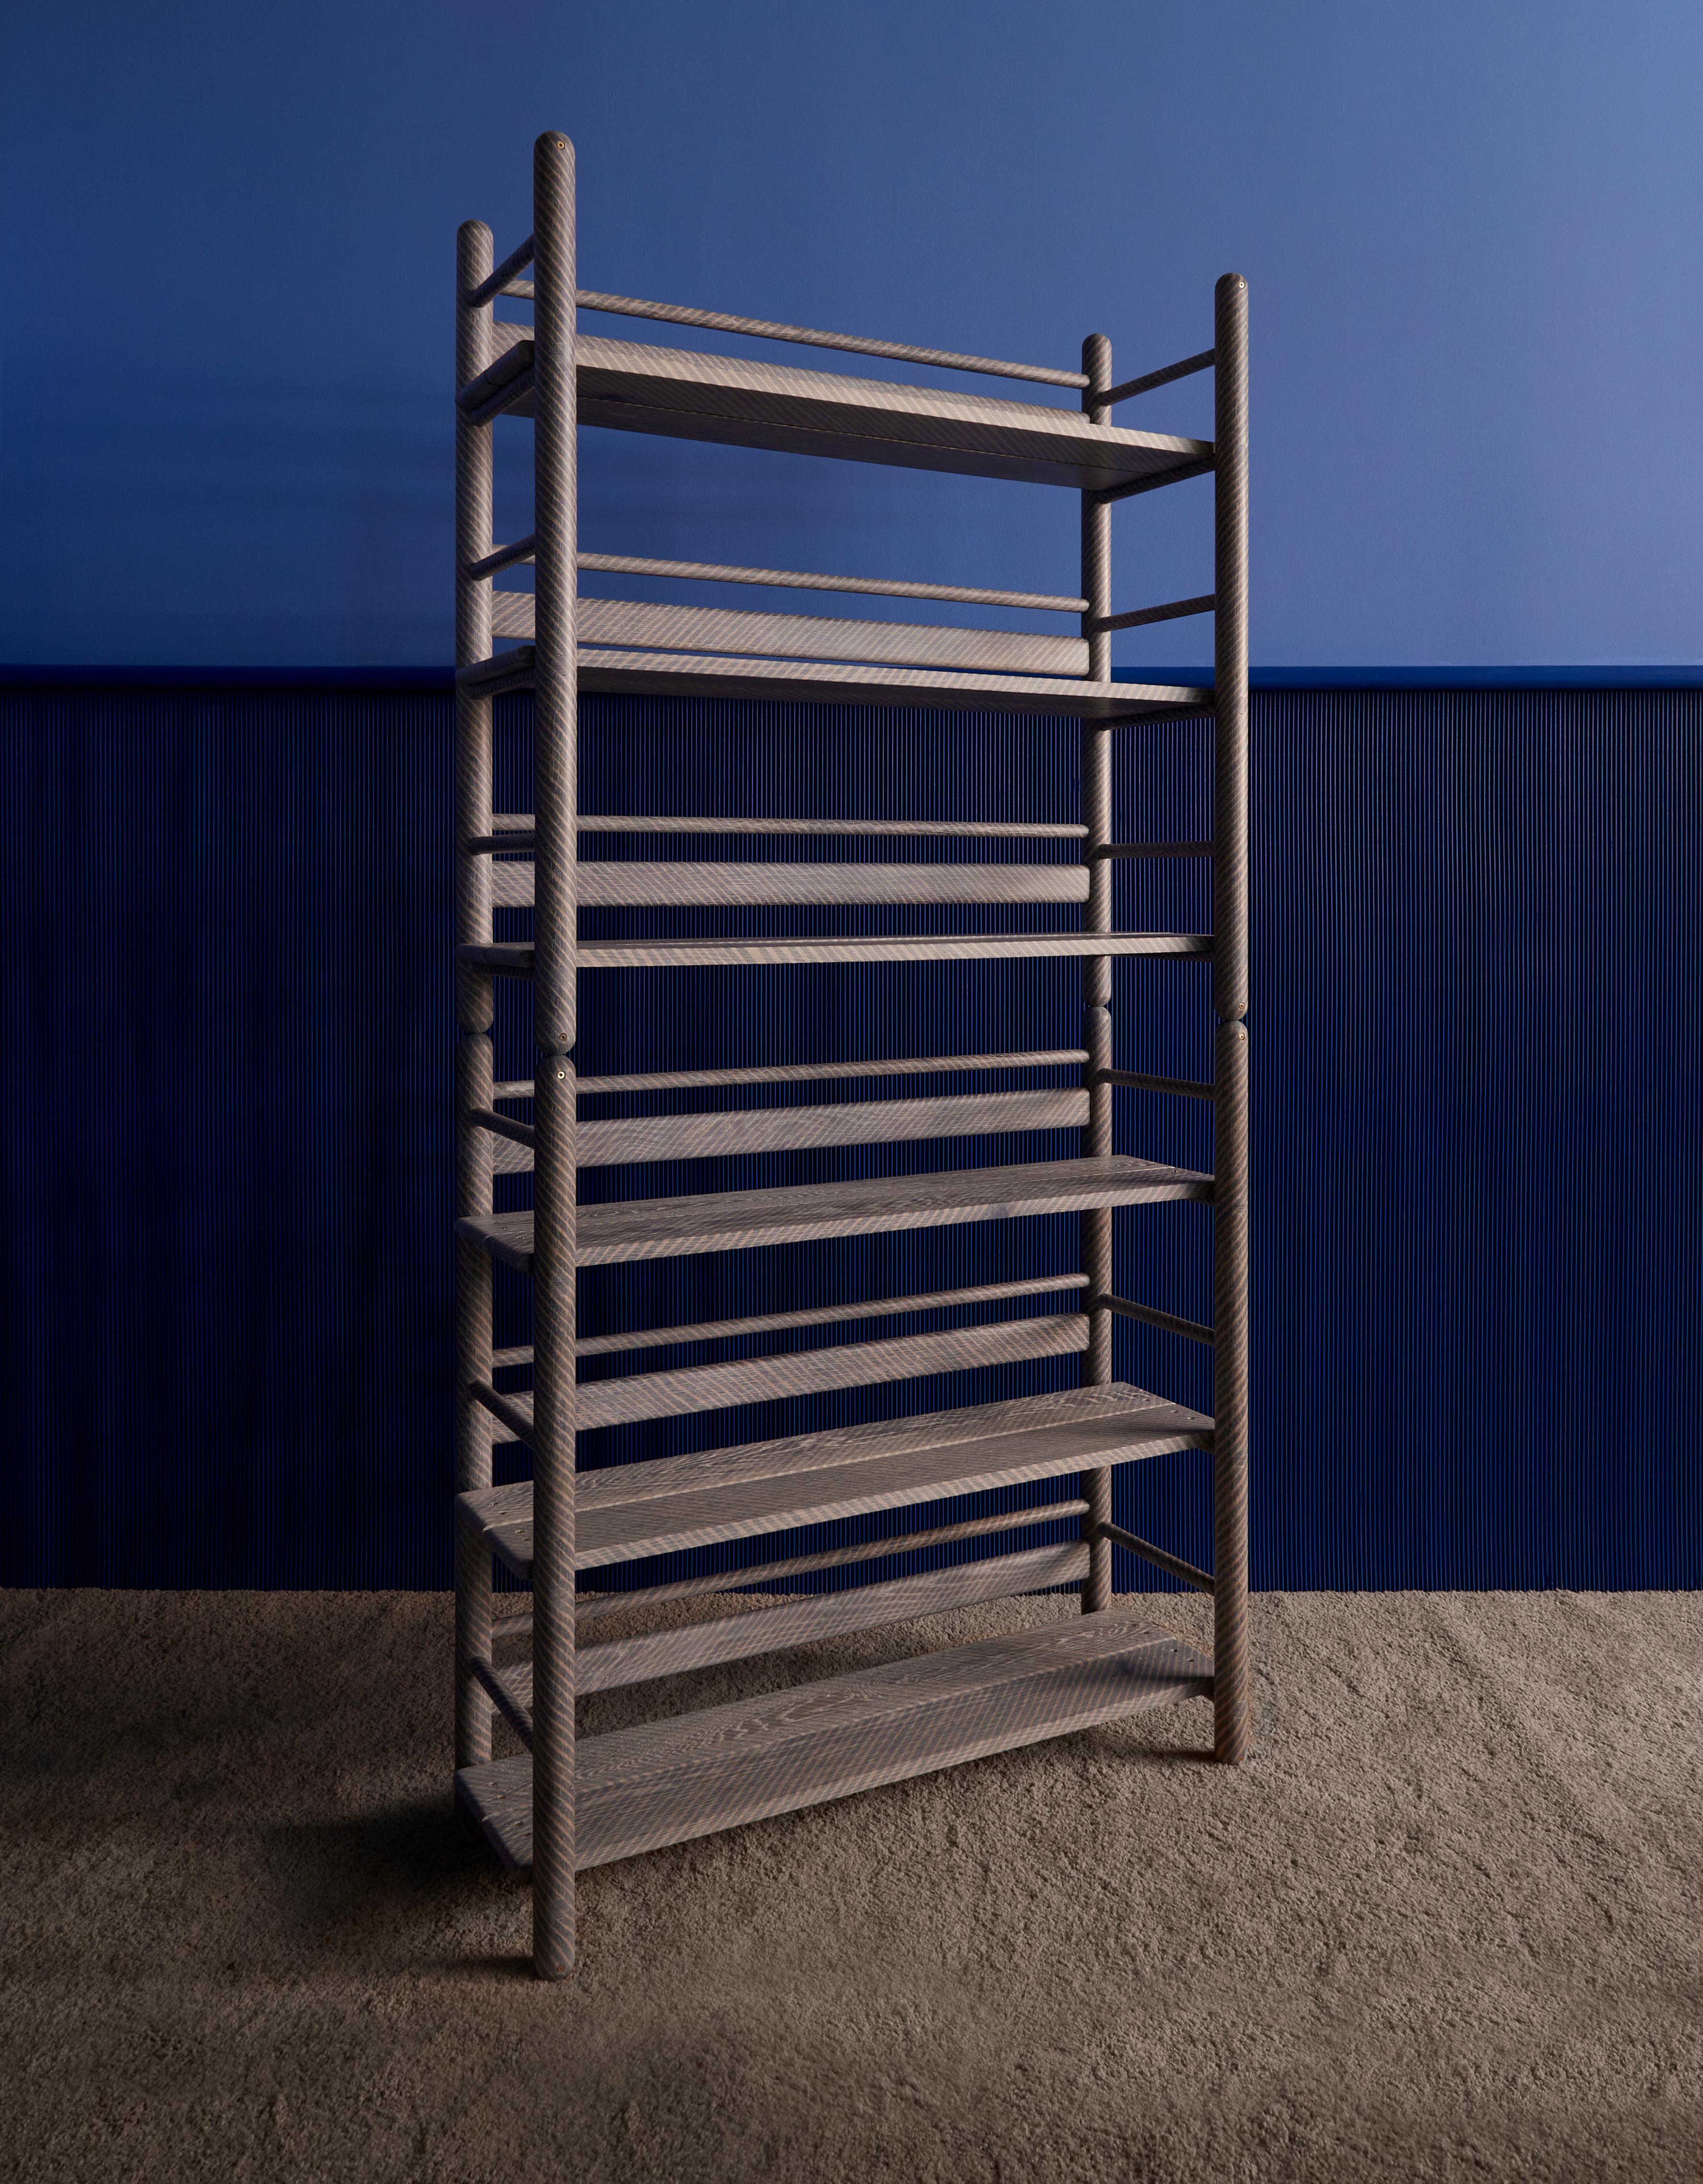 Wave Shelve by Hamilton Holmes
Oxalino Collection 
2020
Dimensions: H 203.2, W 101.6, D 35.6 cm
Materials: White oak and brass screw

This is a freestanding shelving system made from tubular parts and flat shelves. Two units stacked are 80”